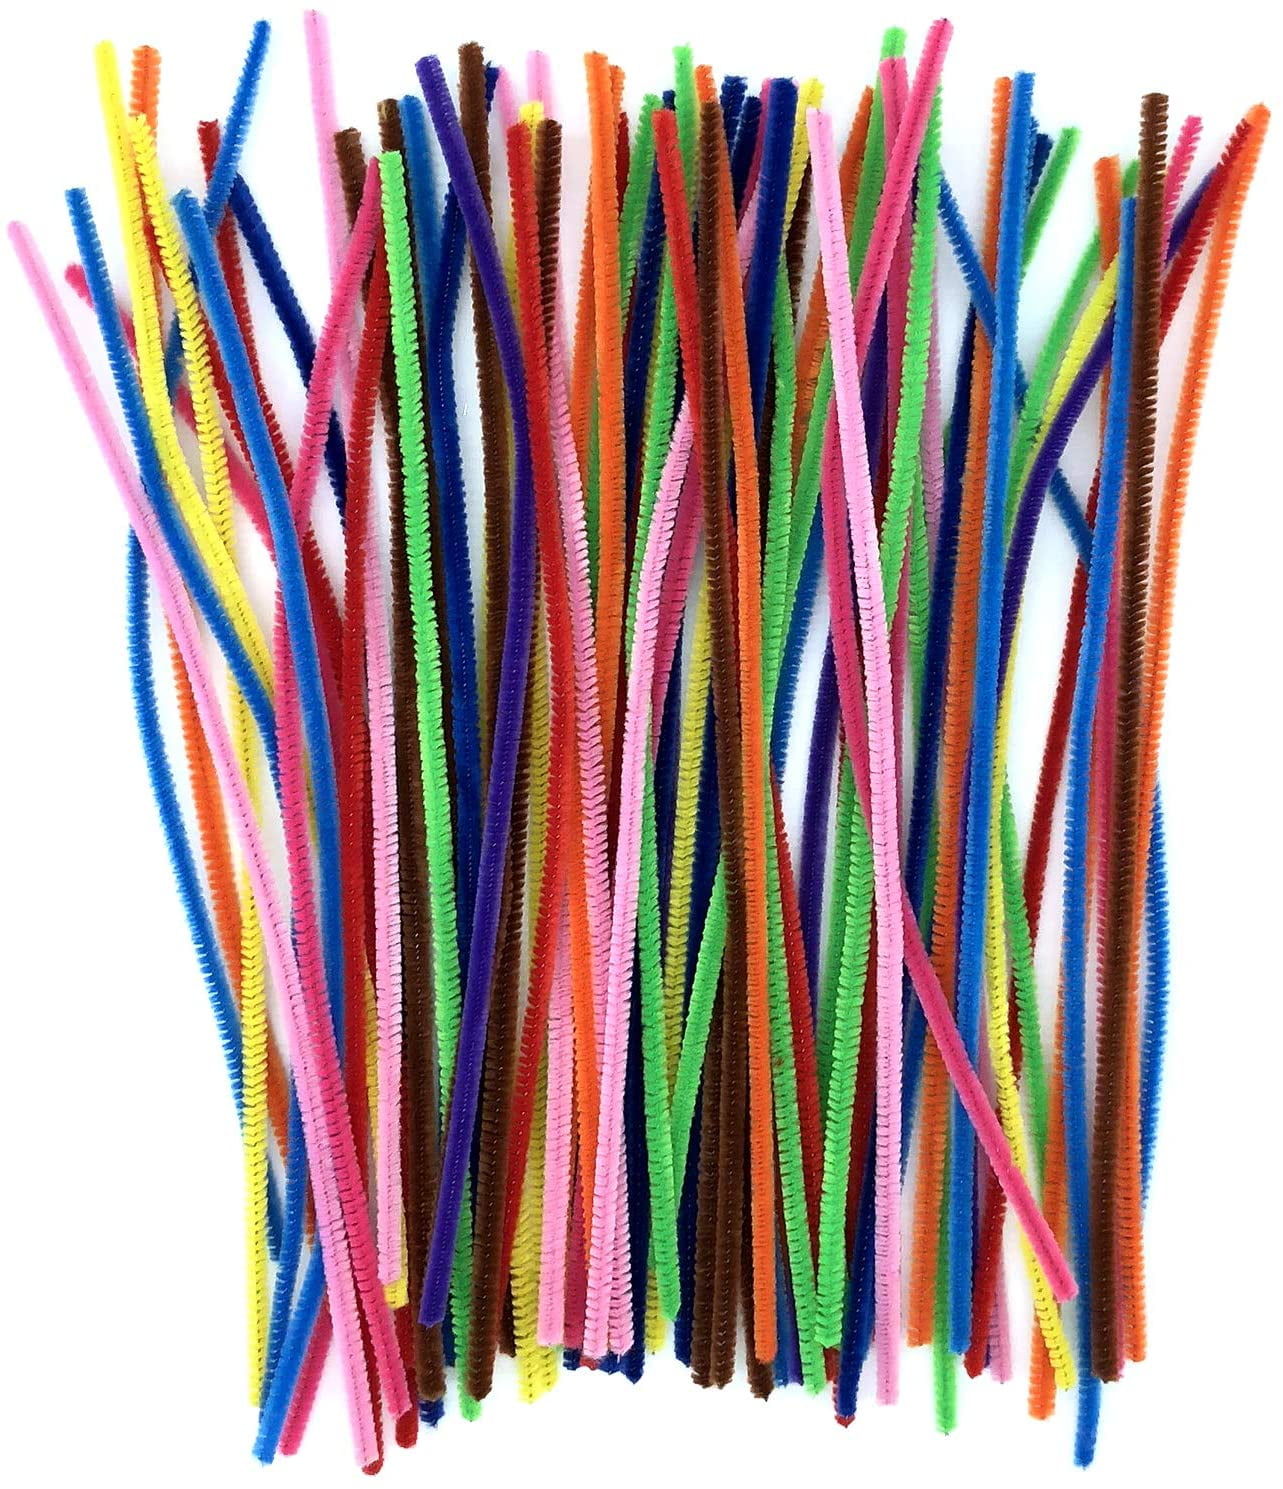 10-1,000 x GREEN chenille craft stems pipe cleaners 30cm long,6mm wide 